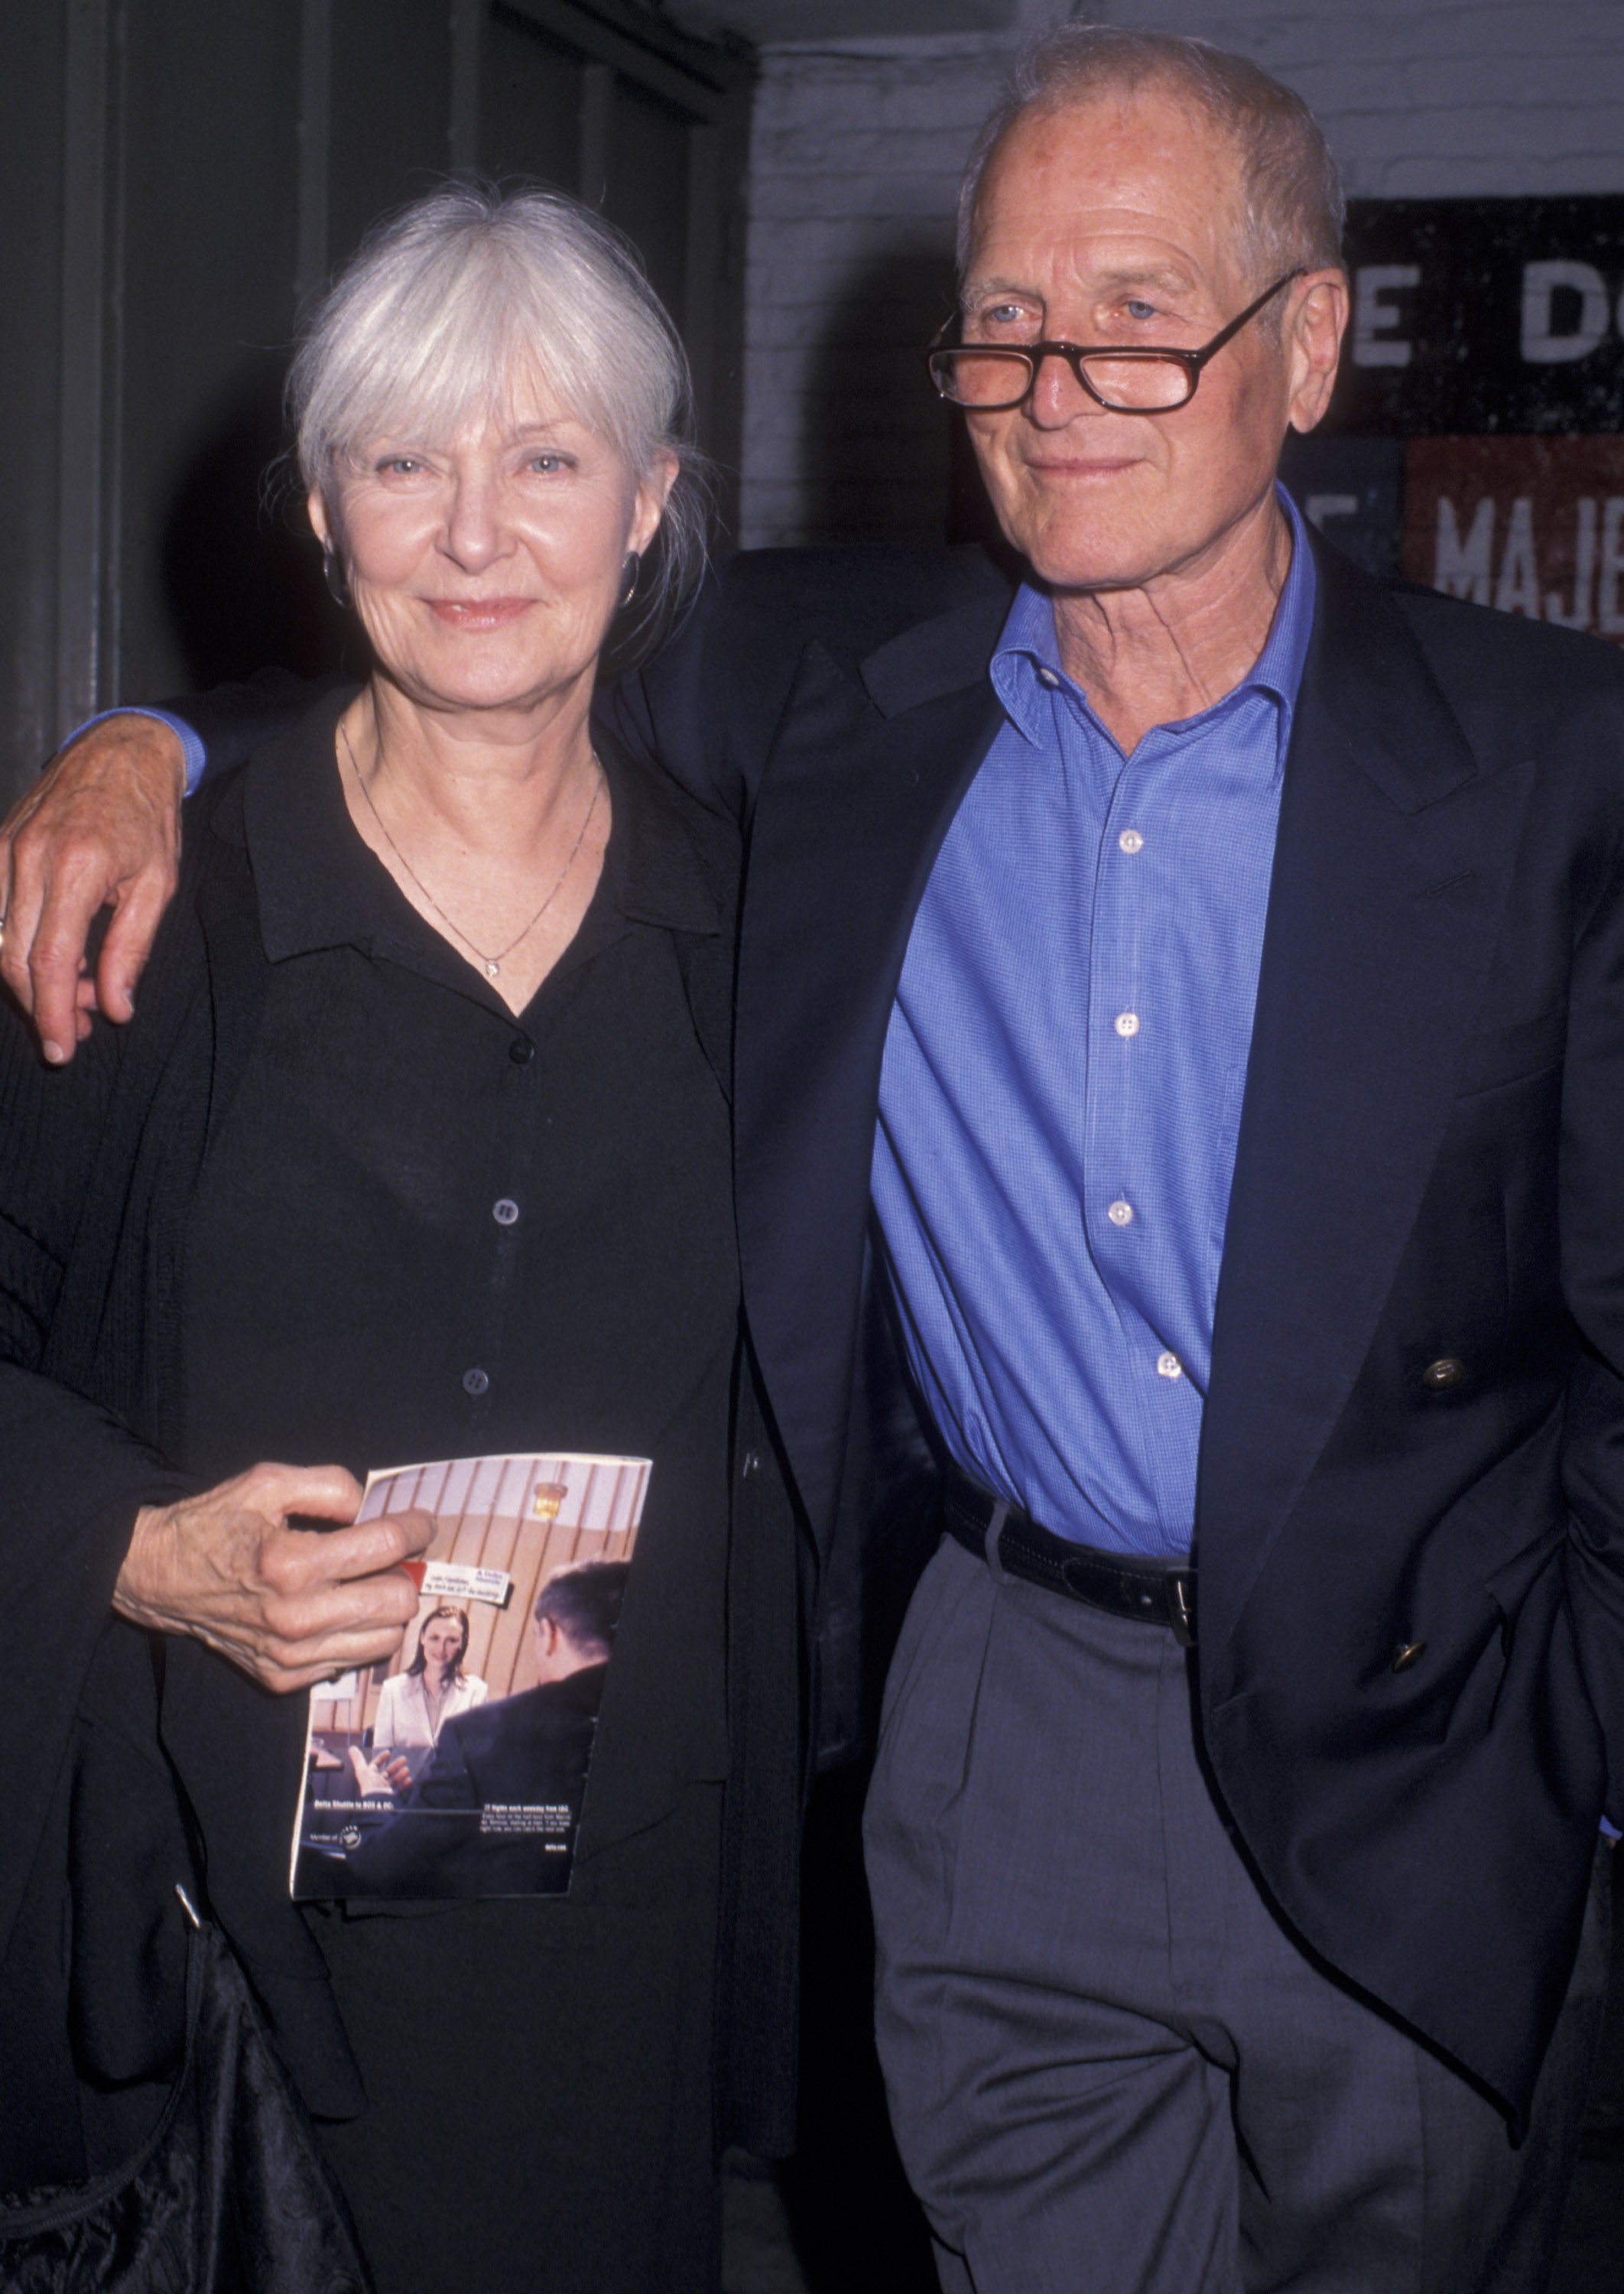 Joanne Woodward and Paul Newman attend the performance of "Stones In His Pockets" on September 4, 2001 at the Golden Theater in New York City. | Source: Getty Images